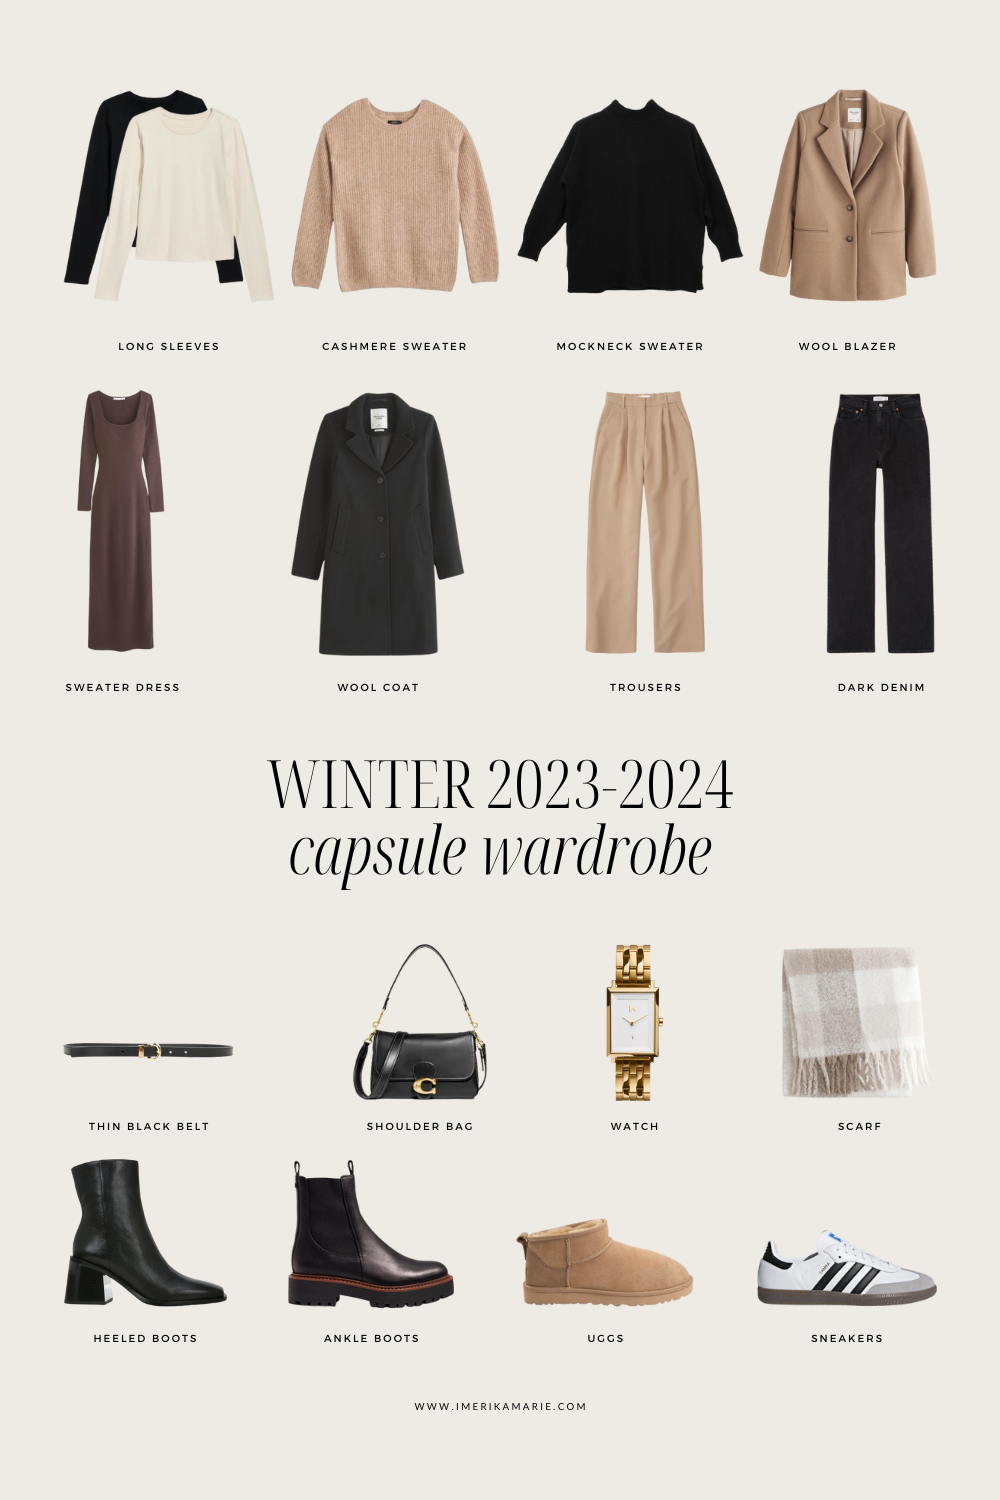 The Ultimate Capsule Wardrobe Items You Need for Winter 2023